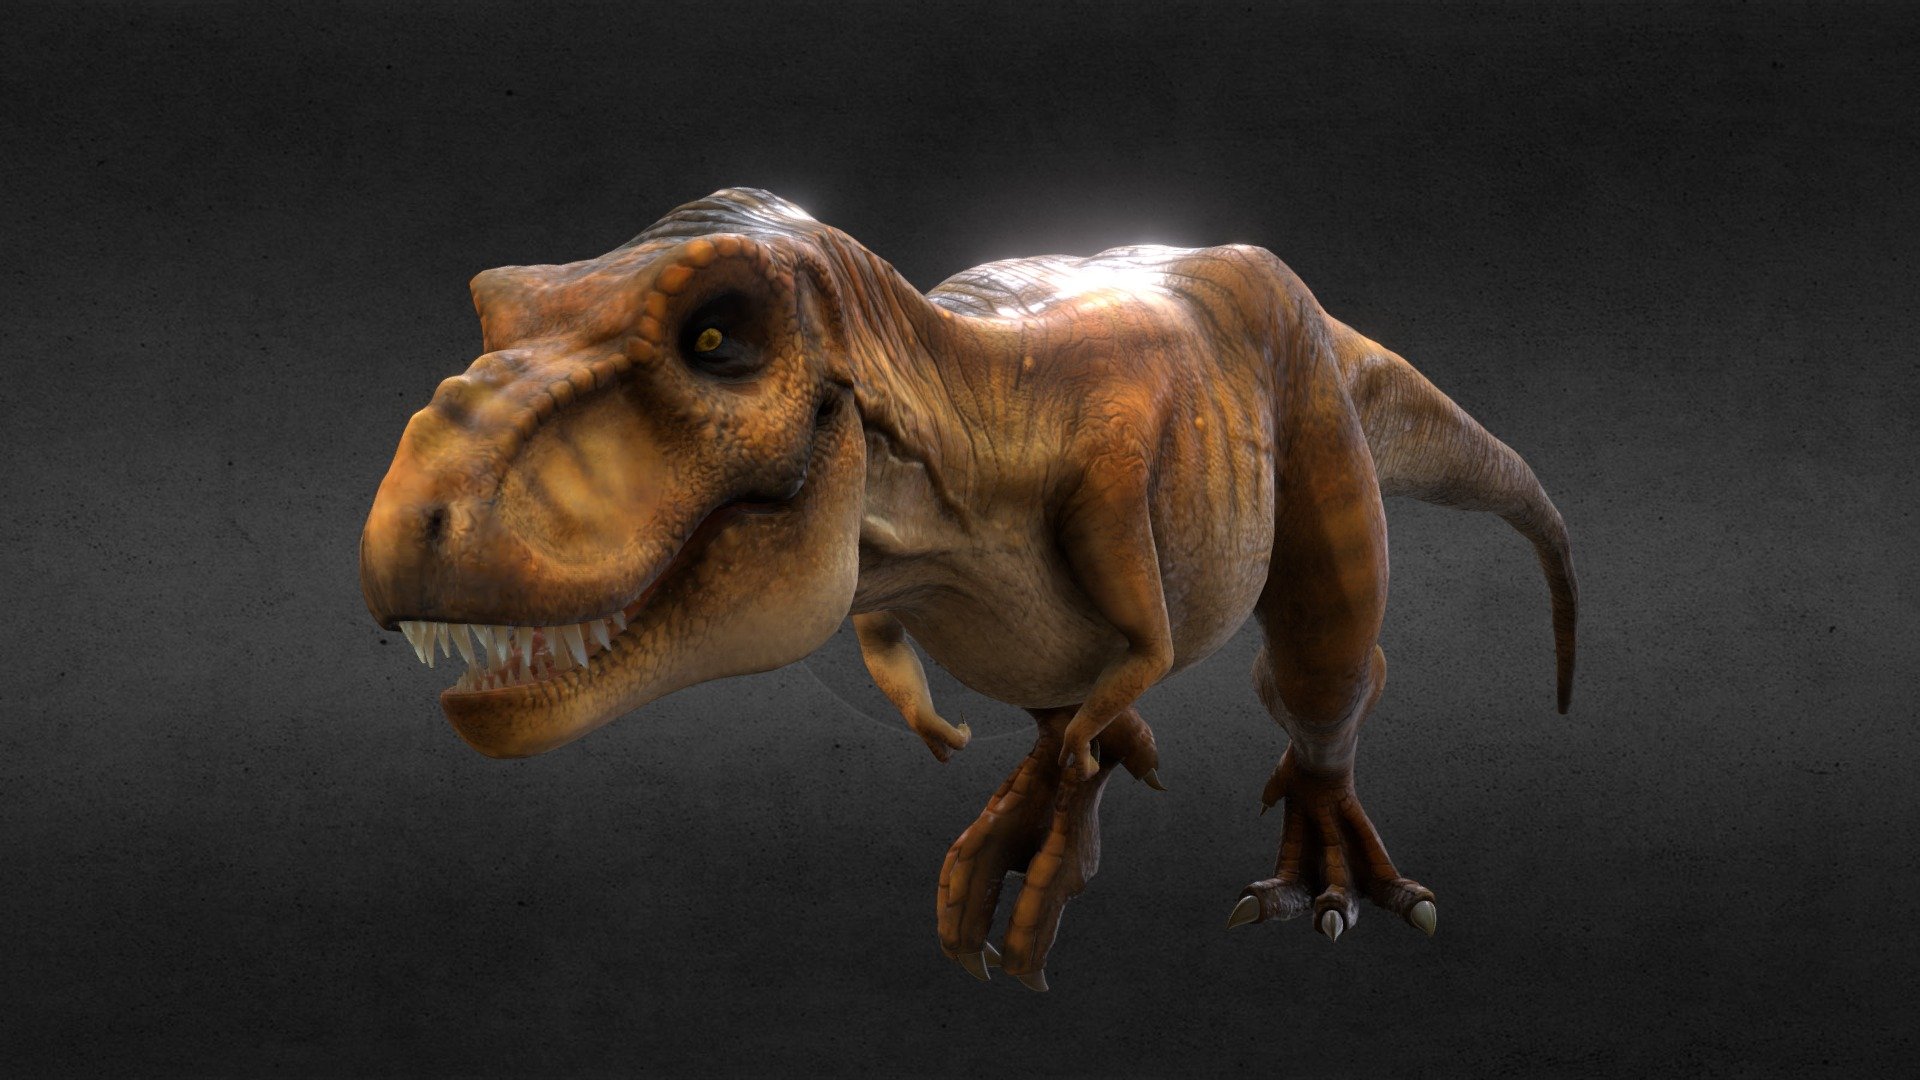 The Queen of Isla Nublar is here !! 
This model was made in Blender v2.79 with Principed BSDF node. 
Body have 2K &amp; 4K maps. 
Includes 3 Animations + Static pose: 
-Walk 
-Run 
-action 
You can see the trailer here: 
https://www.youtube.com/watch?v=jYP1HcvsAws

If you have any problem please send me a mail to: bart.art.animador@gmail.com

Hope you like it and enjoy :D ! - Tyrannosaurus of Jurassic Park (Rigg & Animated) - Buy Royalty Free 3D model by Ignacio Barthelemiez (@bart.art) 3d model